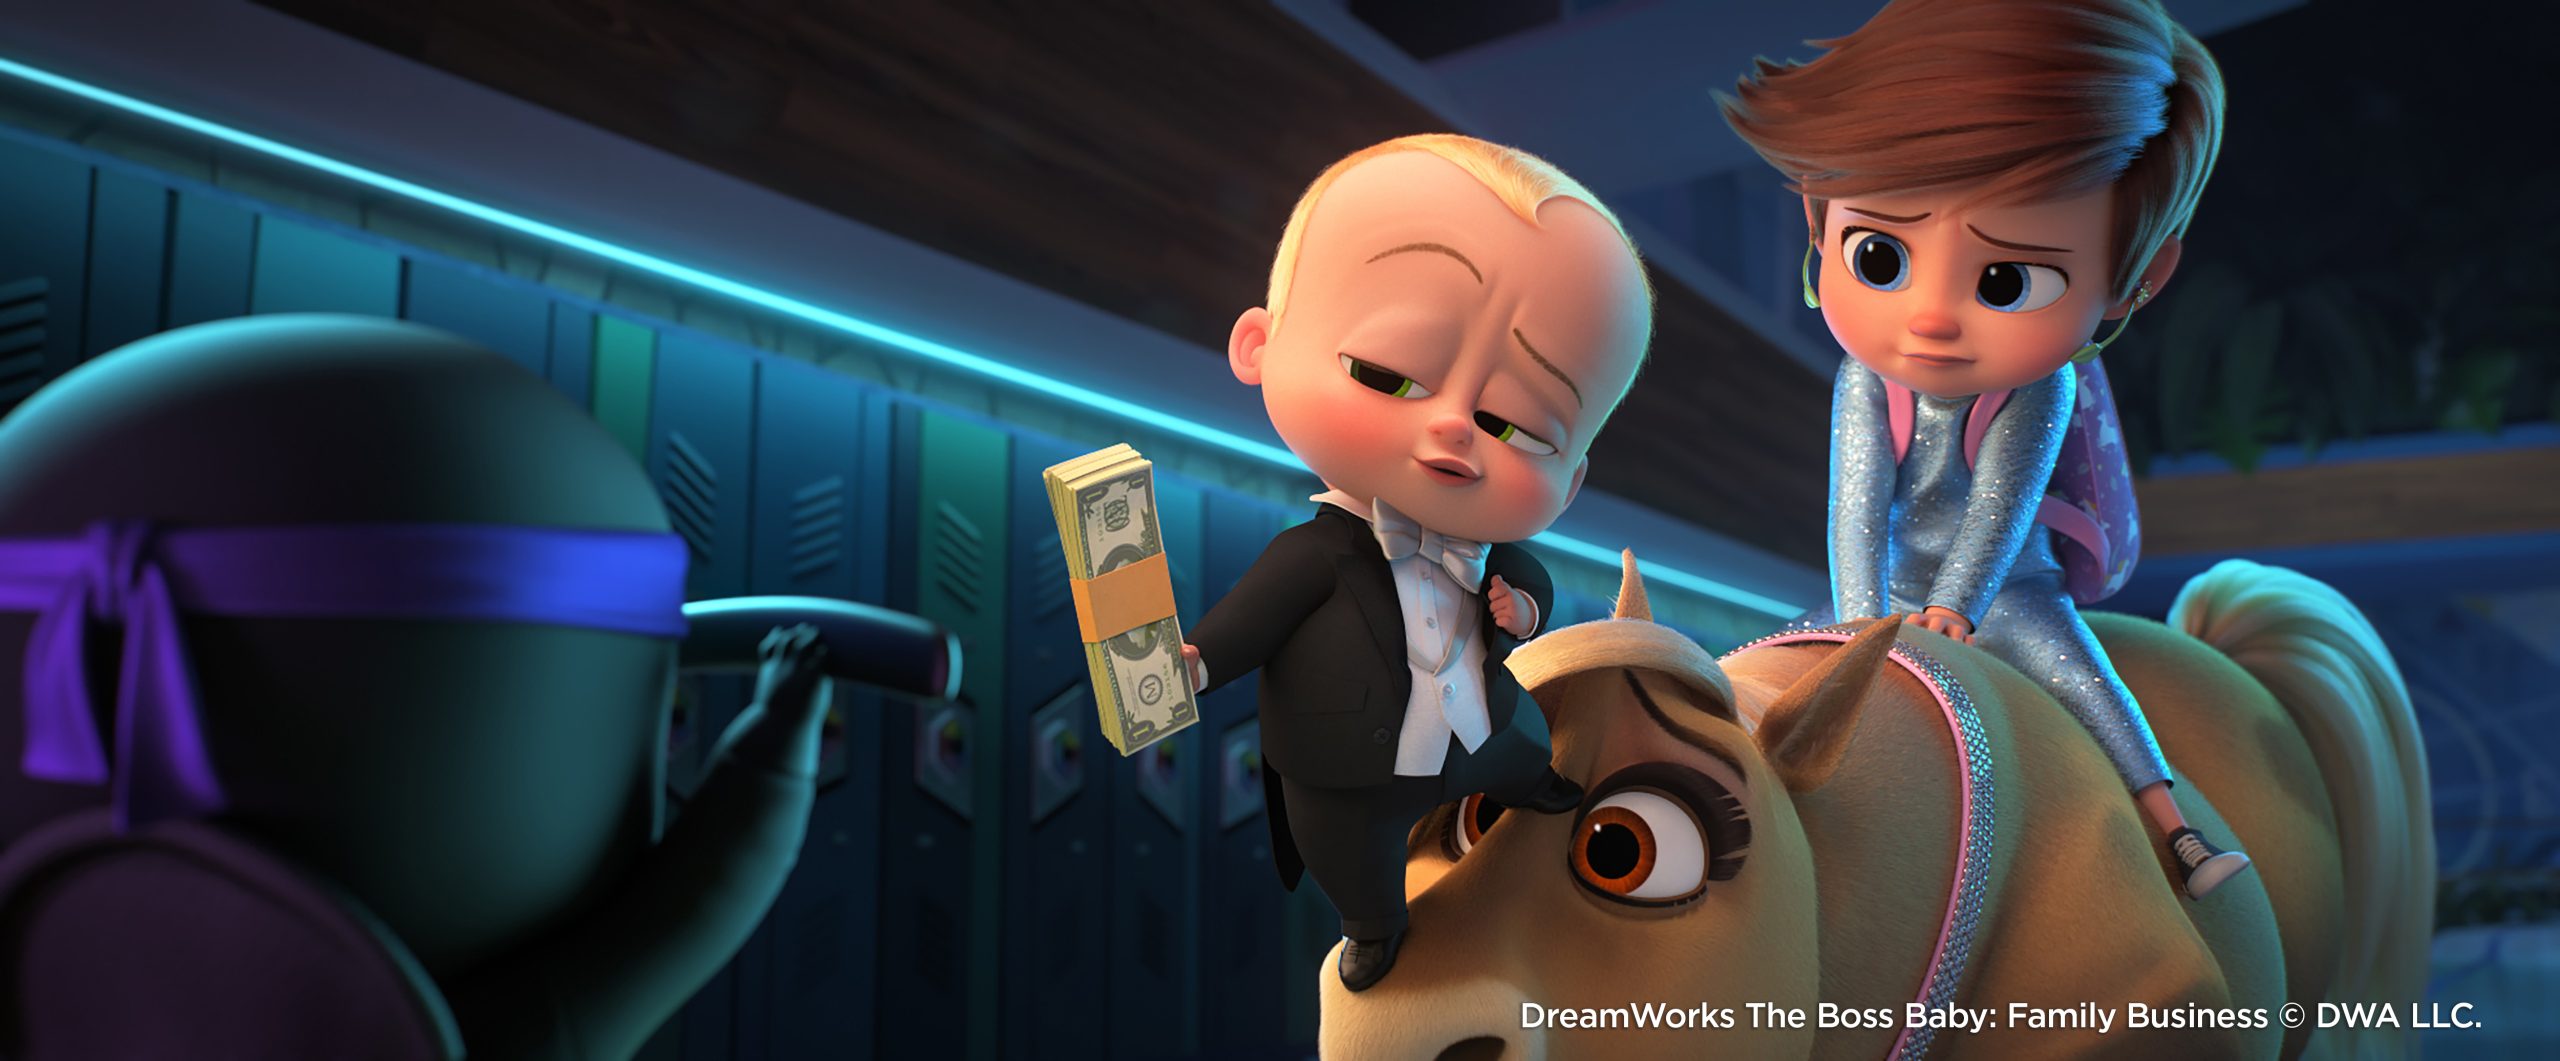 (from left) The Boss Baby/Ted Templeton (Alec Baldwin) and young Tim Templeton (James Marsden) in DreamWorks Animation's The Boss Baby: Family Business, directed by Tom McGrath.